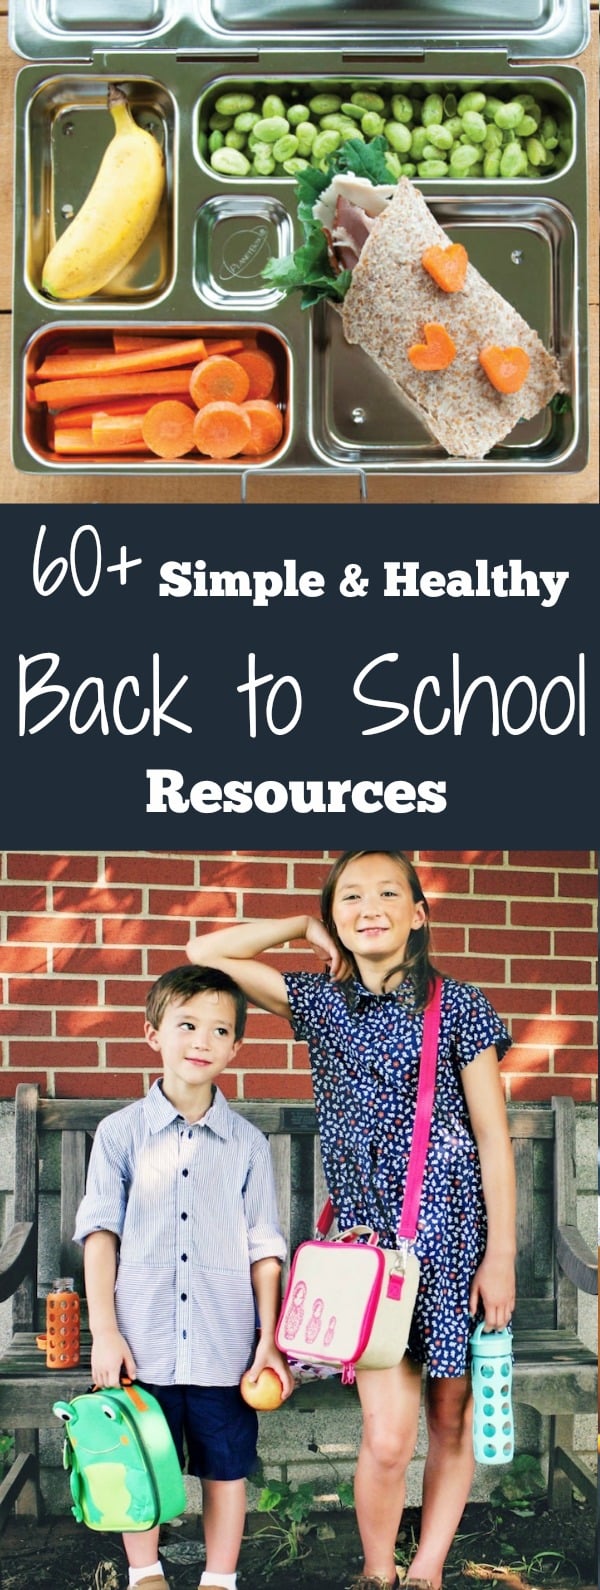 While you’ll find plenty of green Back to School advice in this roundup of articles and links, we hope you’ll also spend some time enjoying the articles on family activities and ways to put simple routines in place for your mornings, packing lunches, and planning dinners.